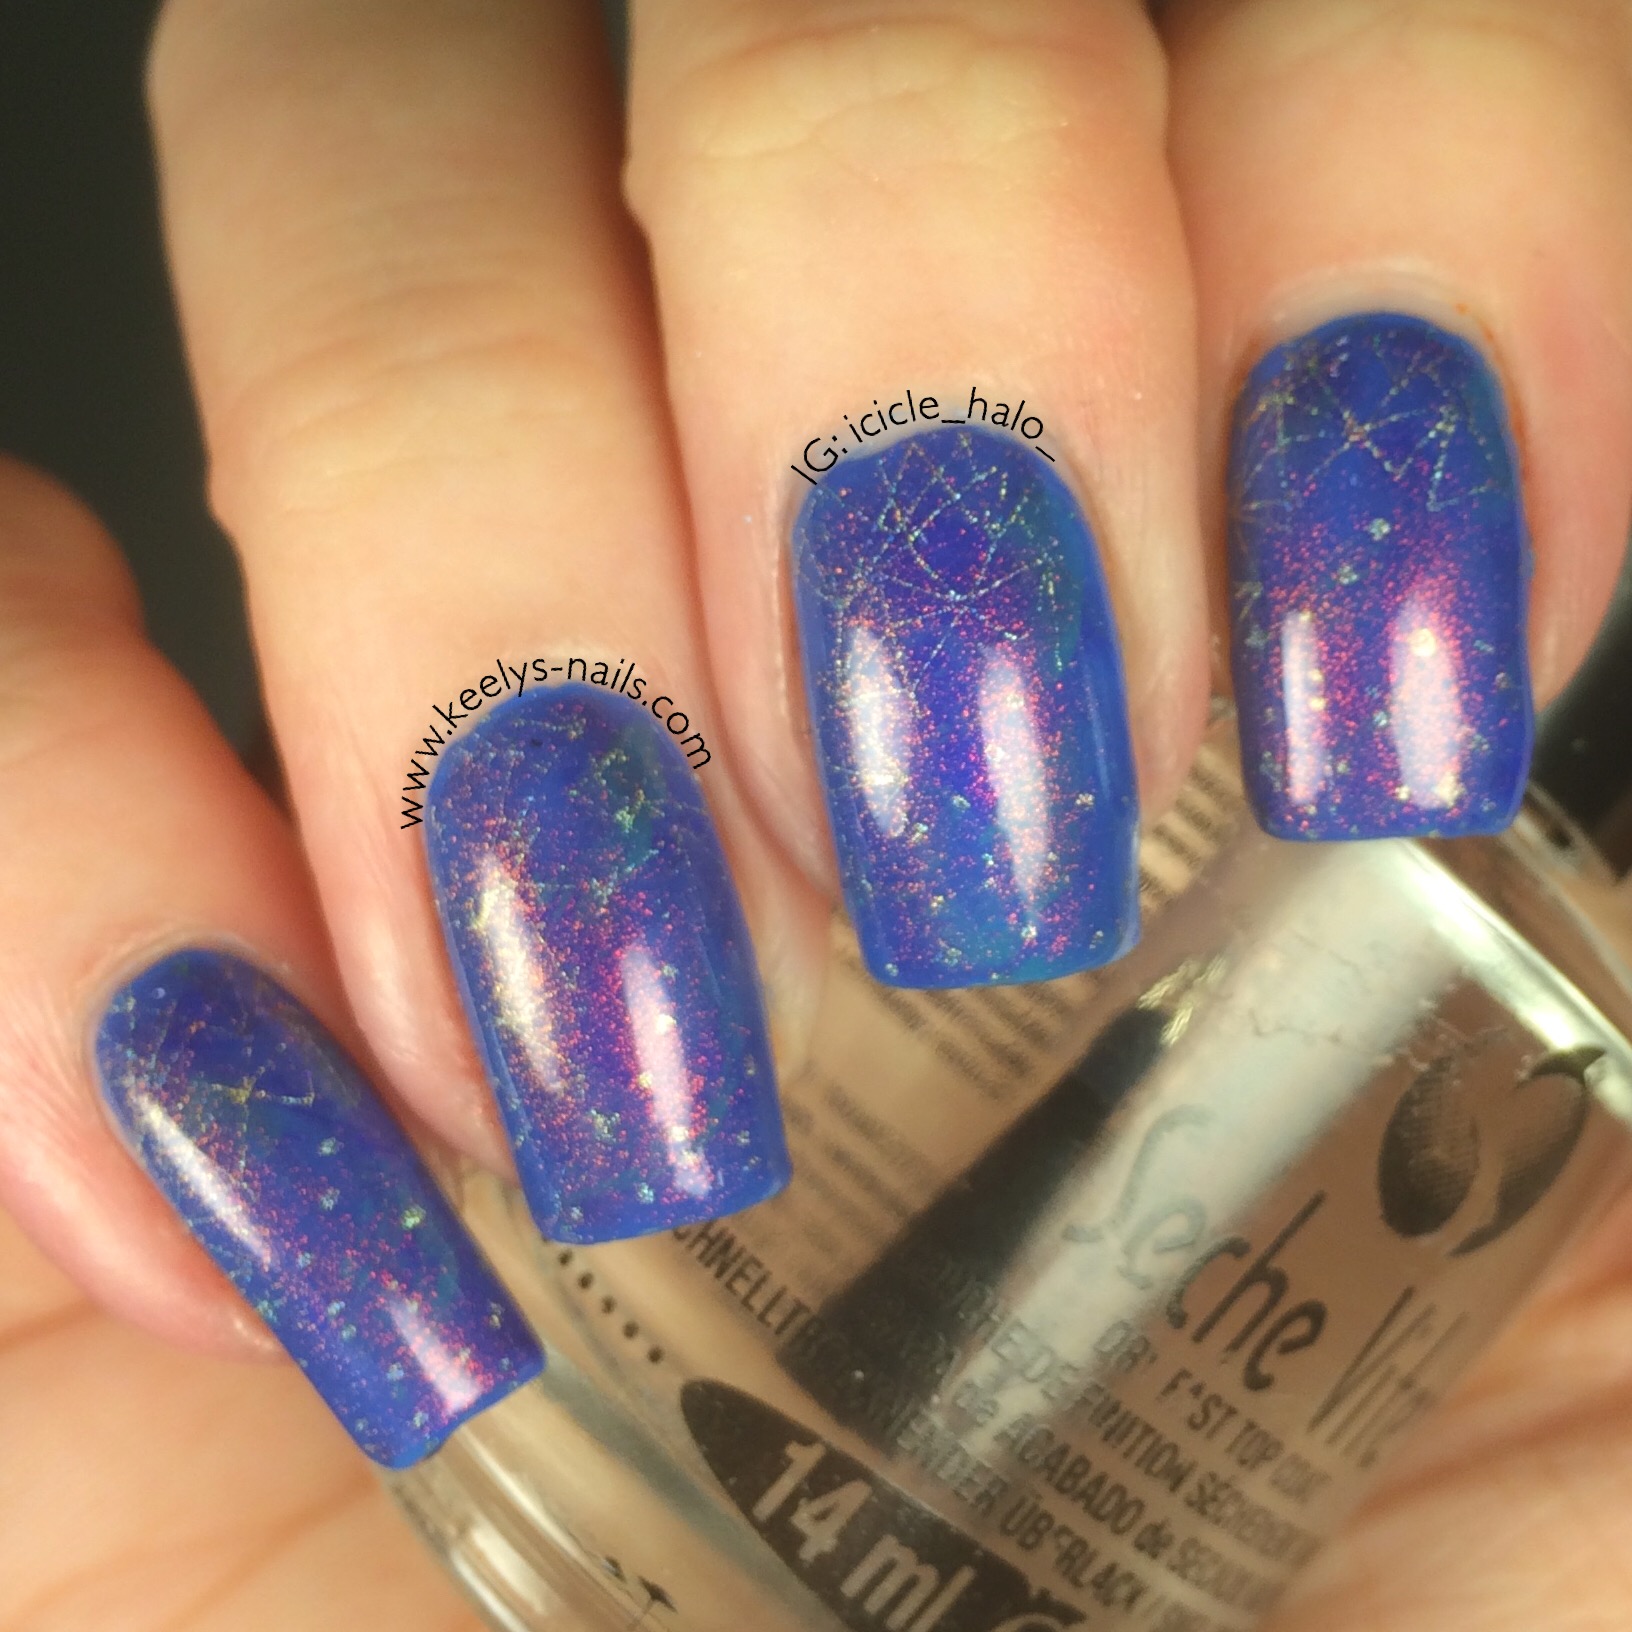 Northern Lights | Keely's Nails 